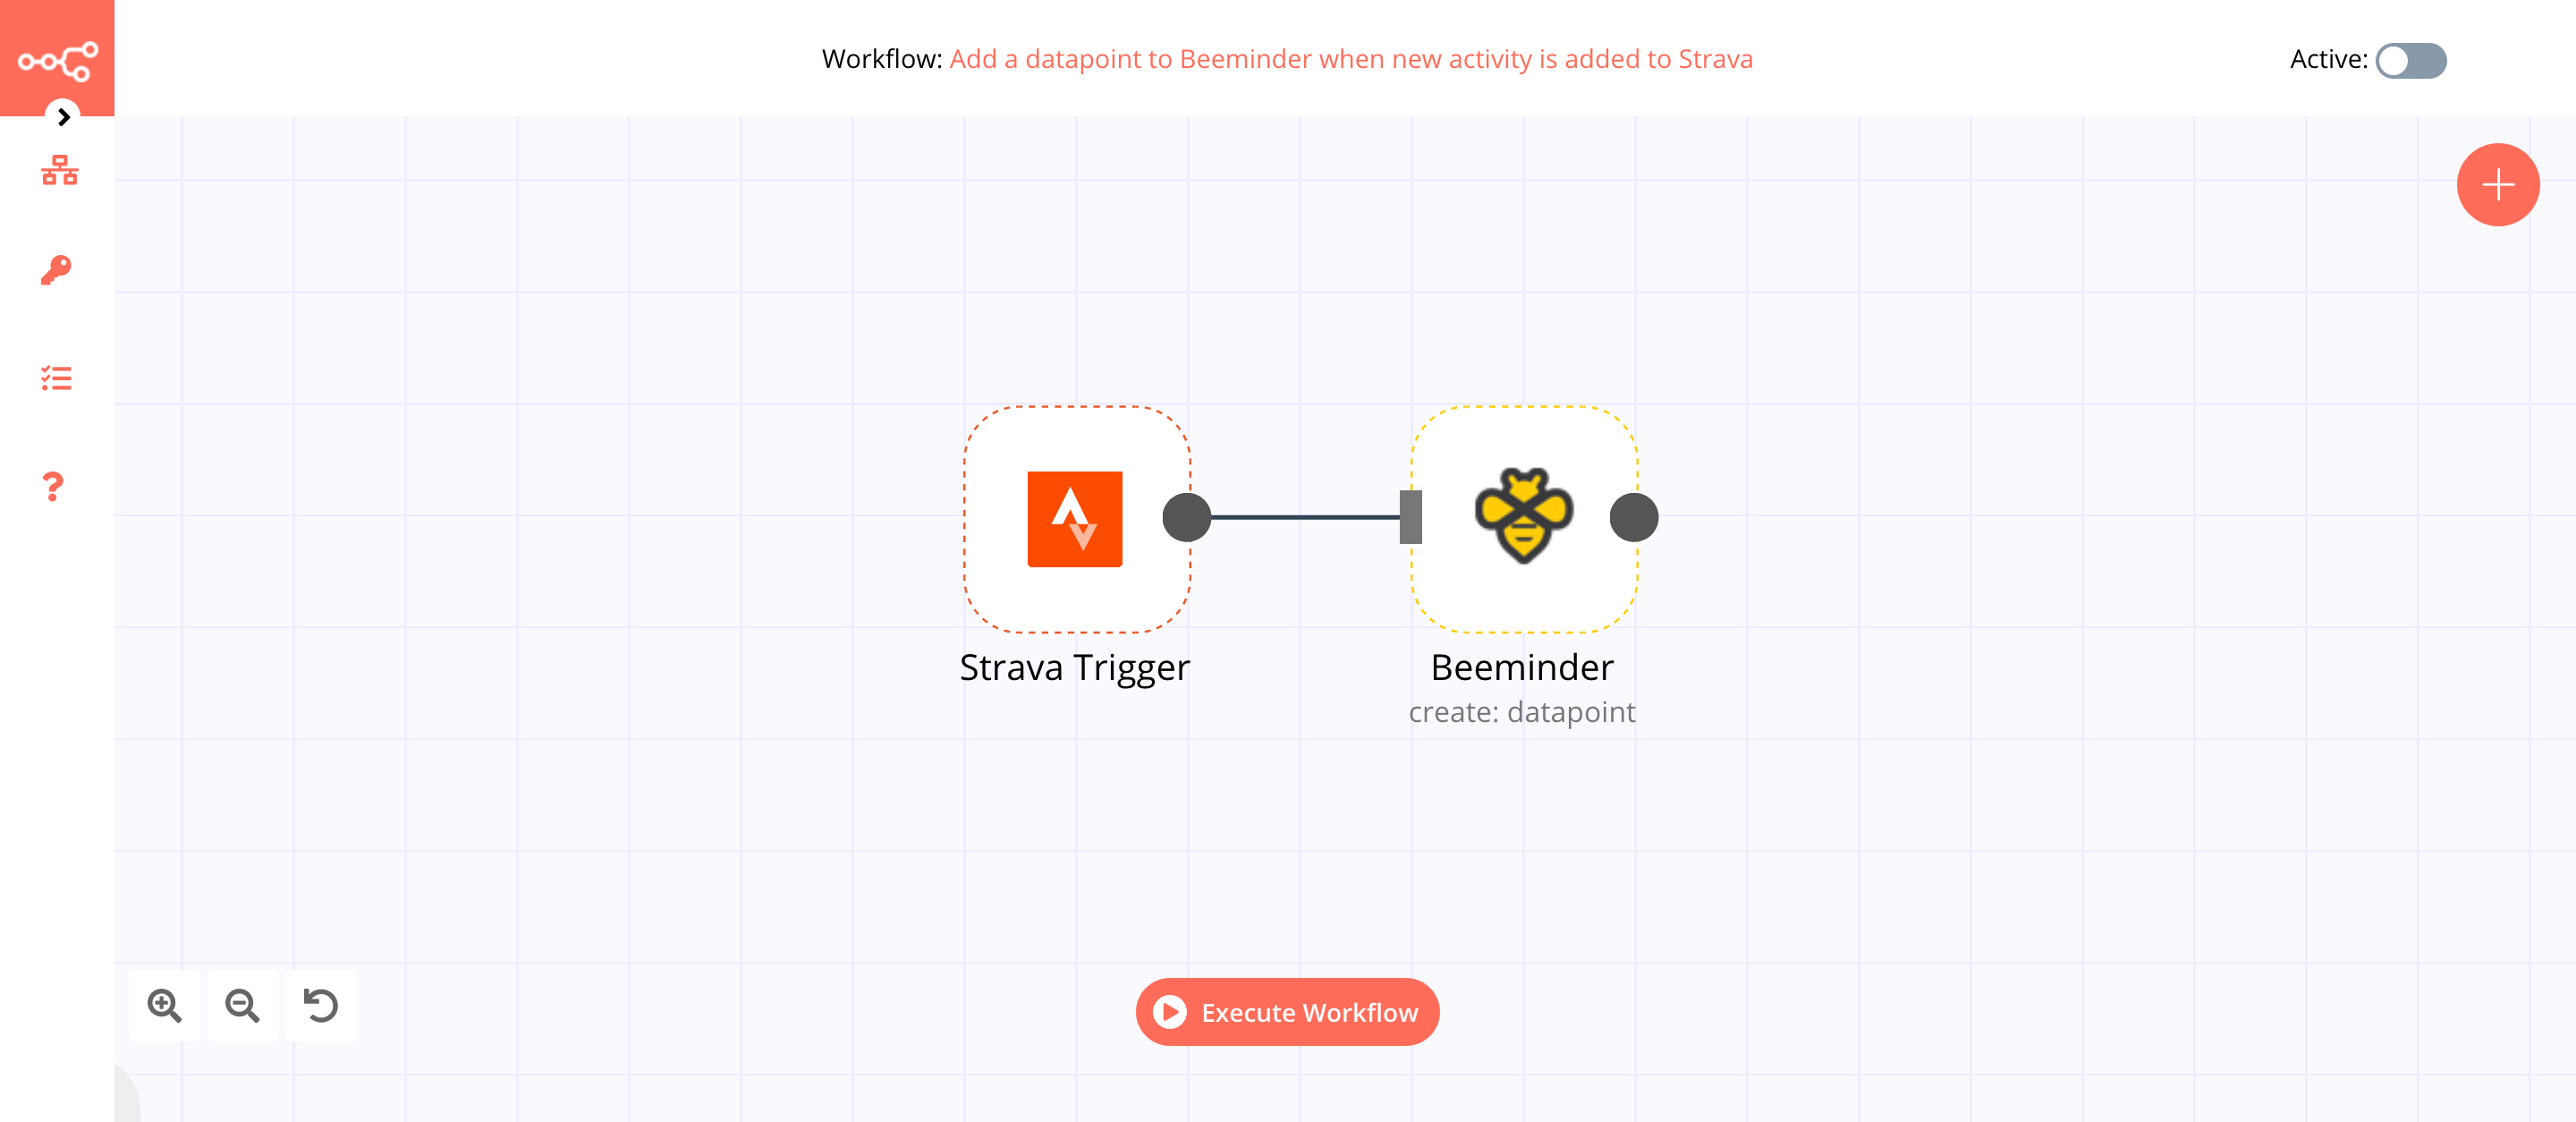 A workflow with the Beeminder node